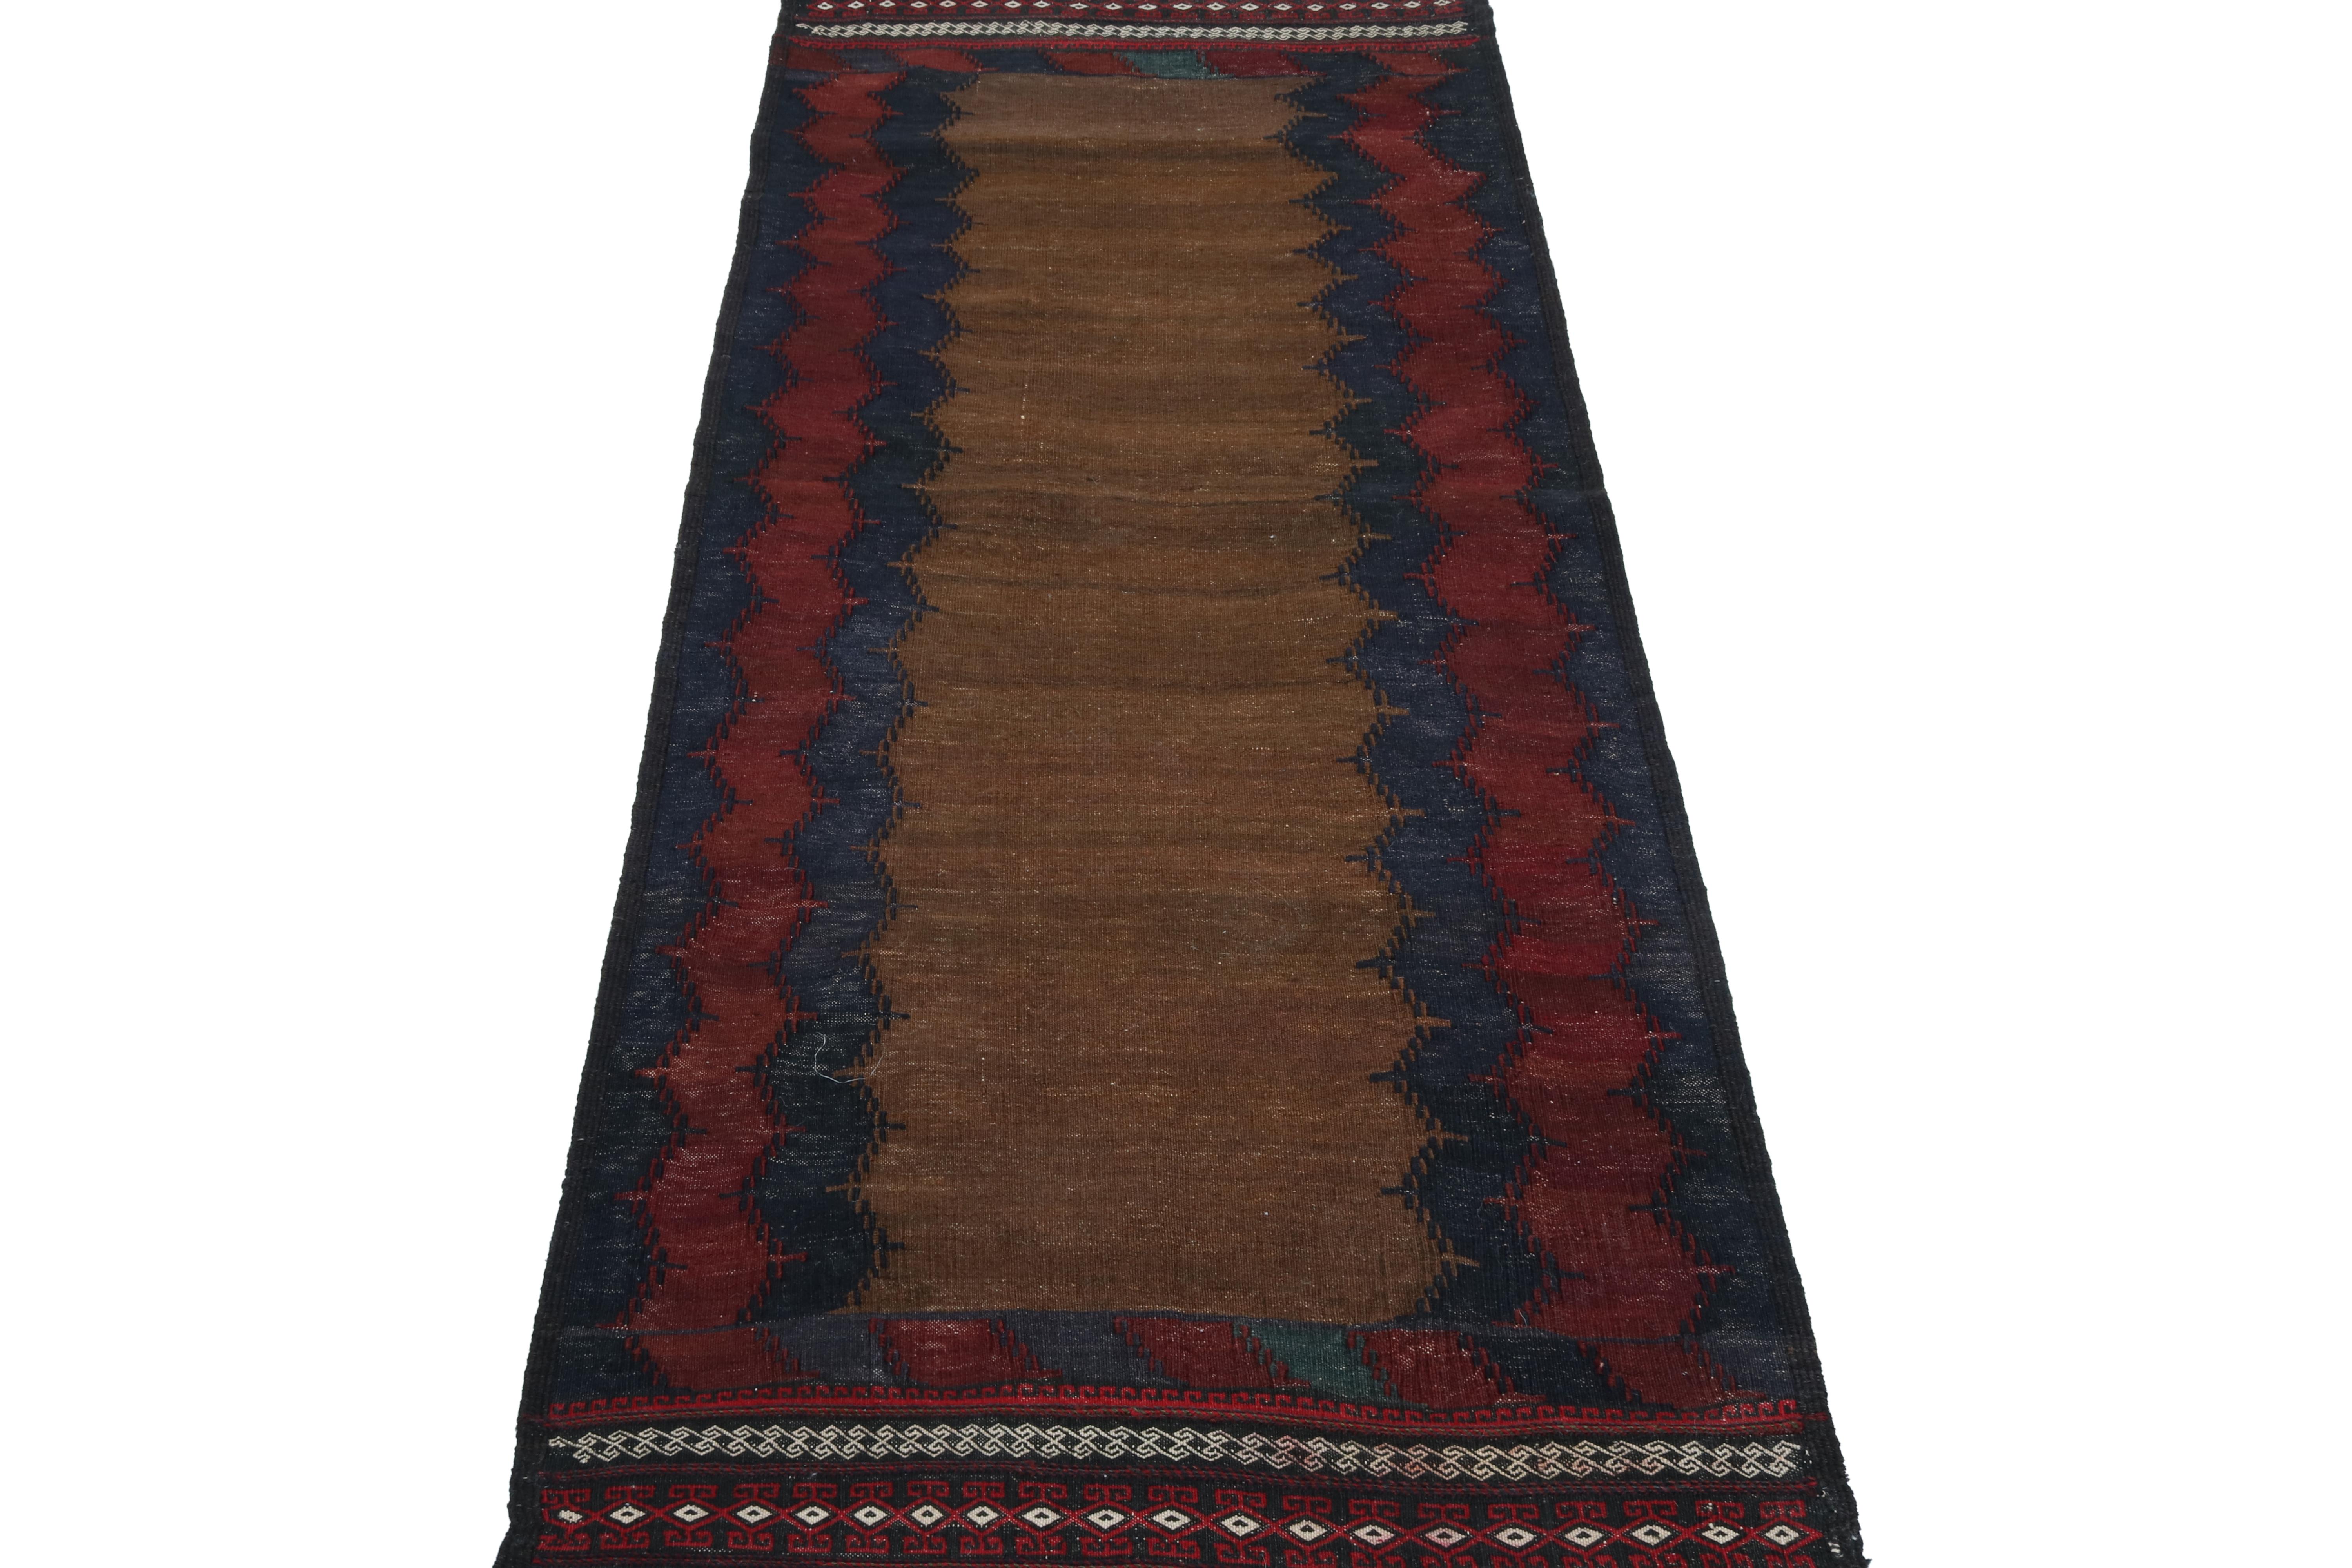 This vintage 2x5 Persian kilim is a tribal Sofreh rug—handwoven in wool circa 1970-1980.

Further on the Design: 

Sofreh Kilims like this piece are known for their minimalist patterns with vibrant colors and durable bodies. This particular rug